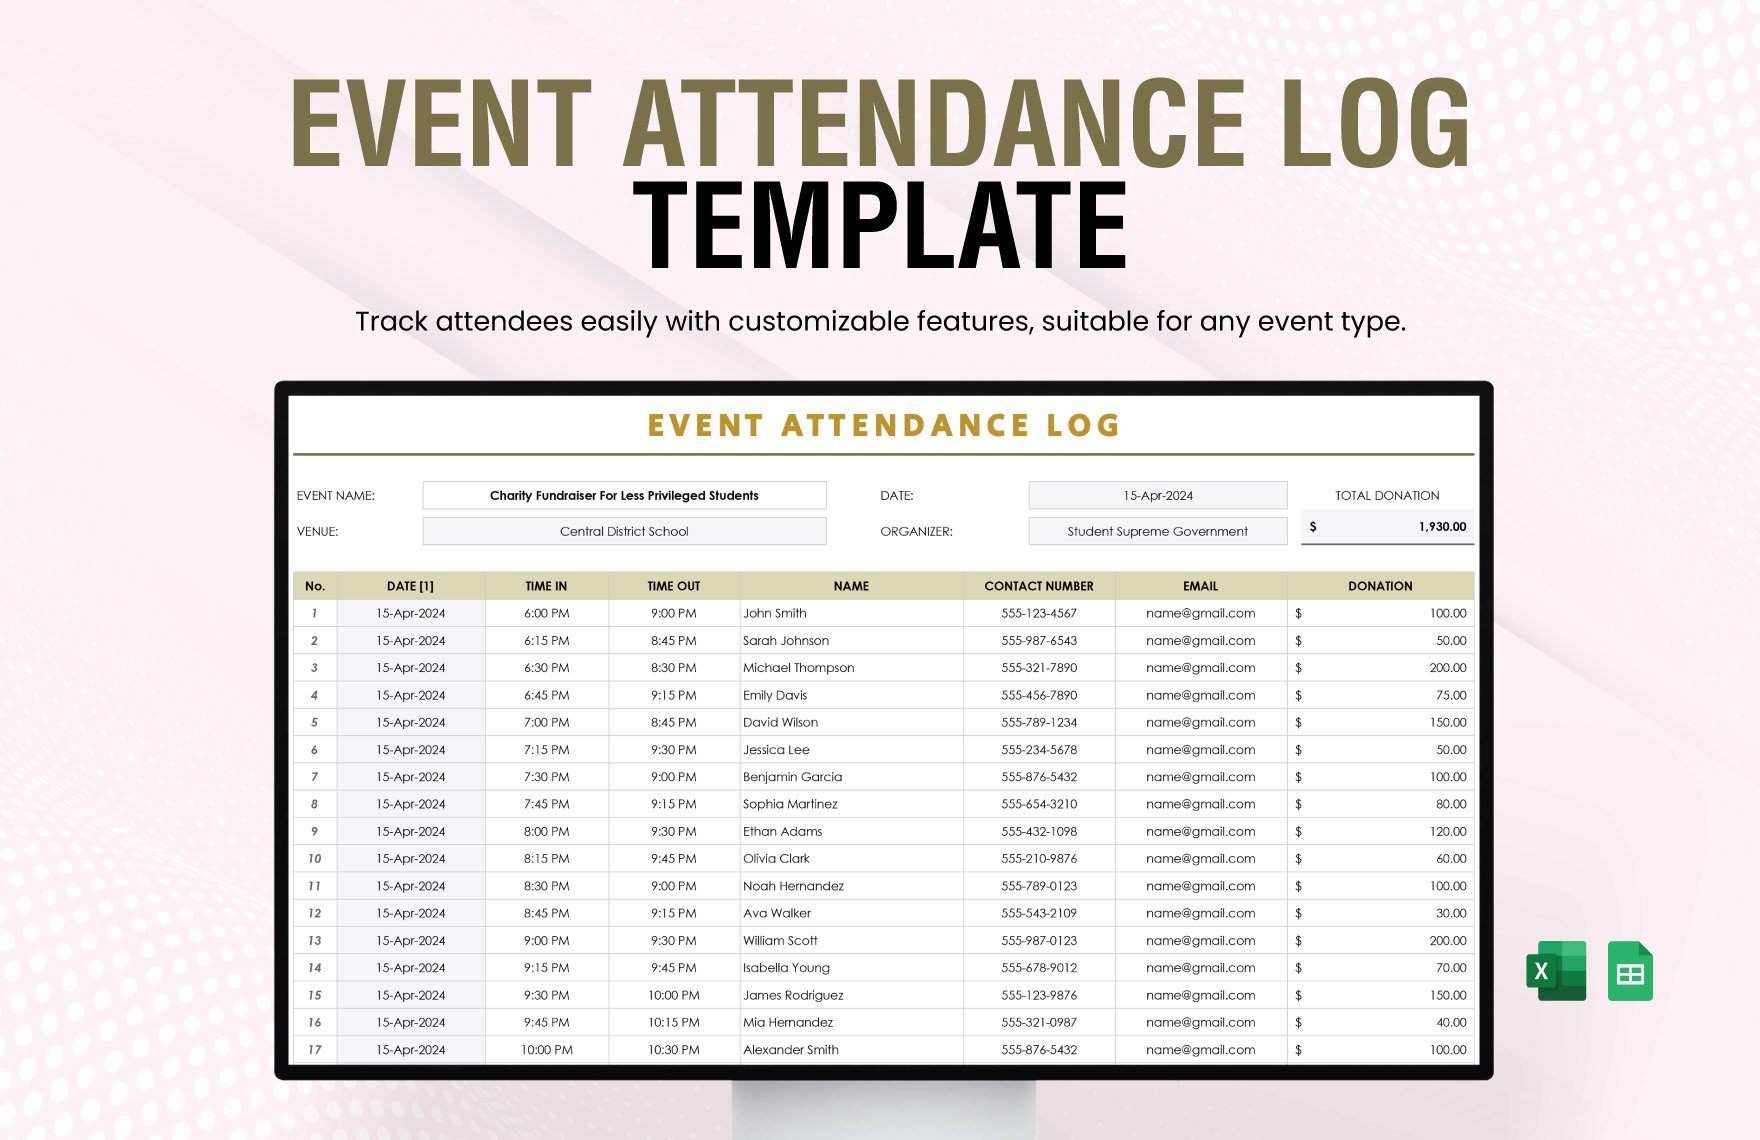 Event Attendance Log Template in Excel, Google Sheets